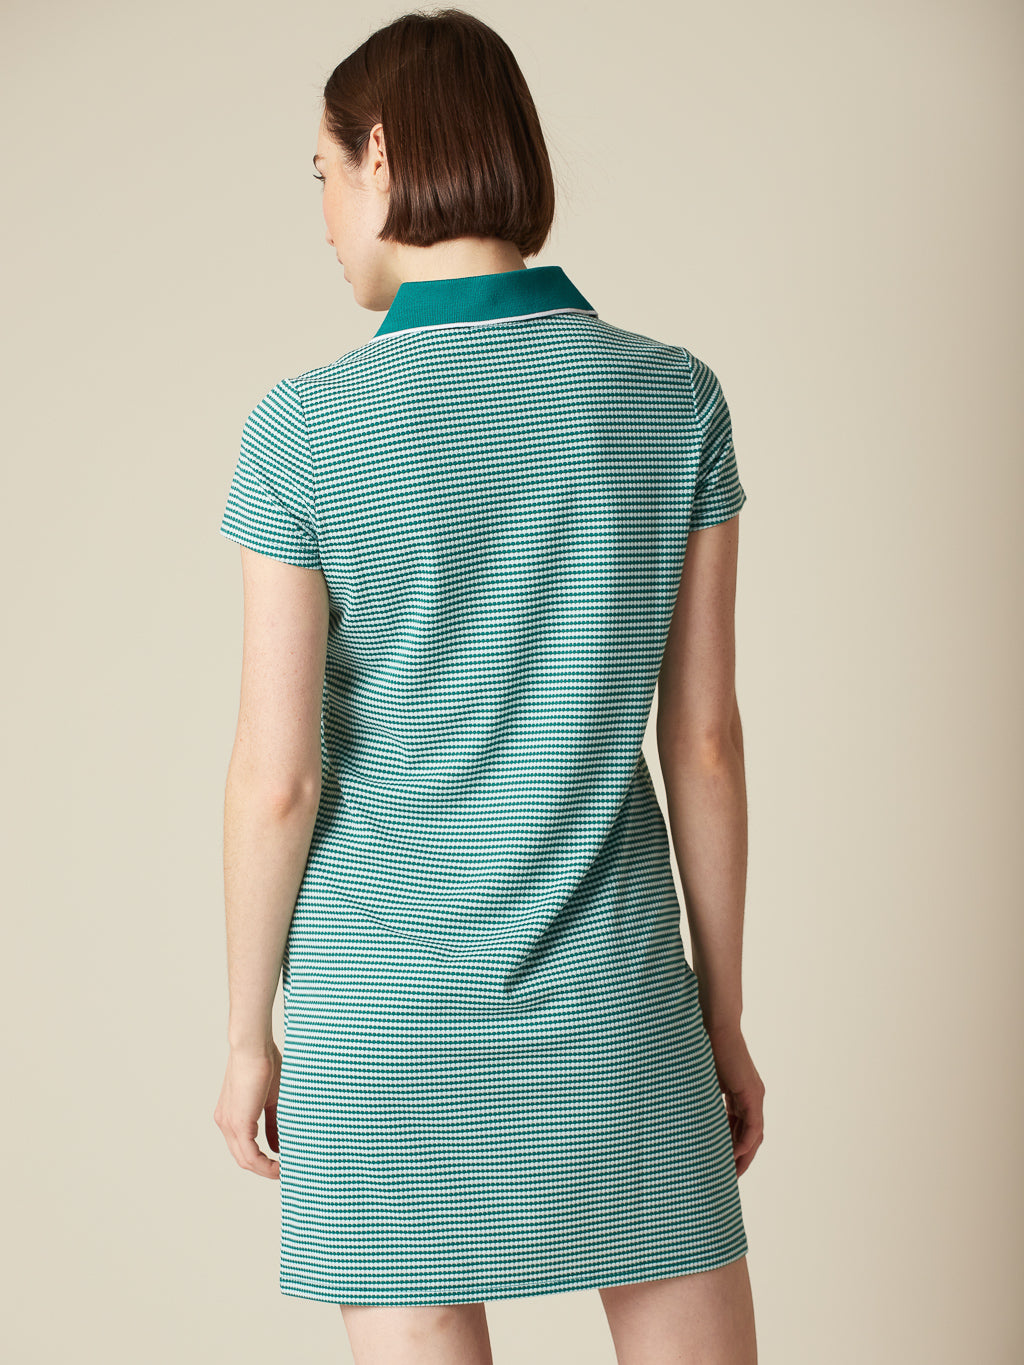 Polo dress with contrasting collar